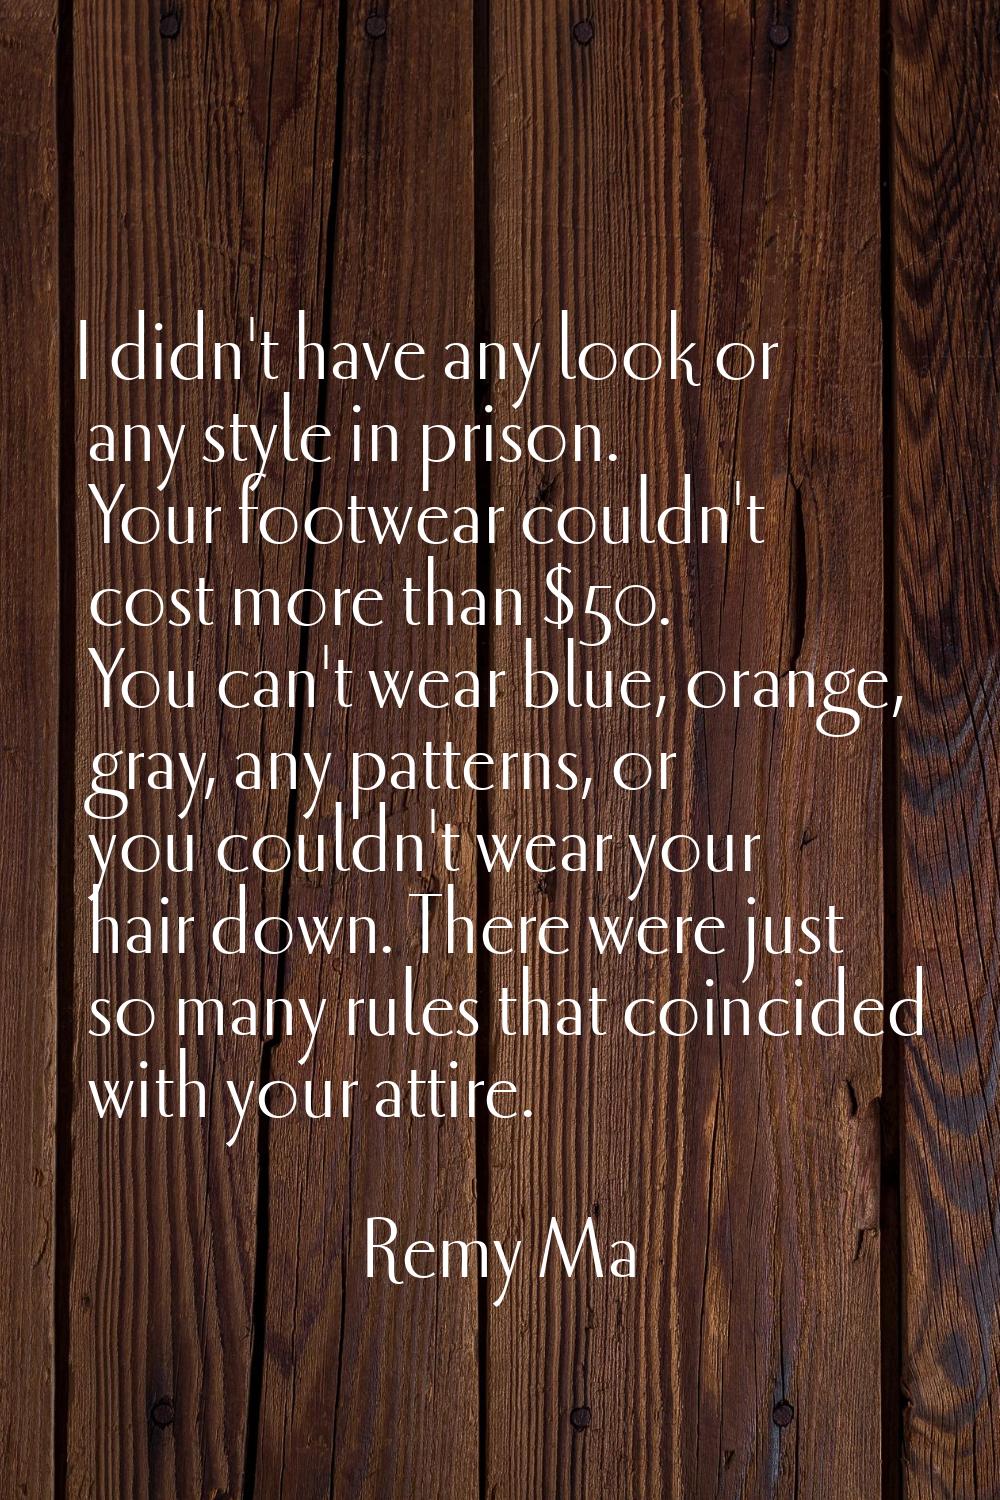 I didn't have any look or any style in prison. Your footwear couldn't cost more than $50. You can't